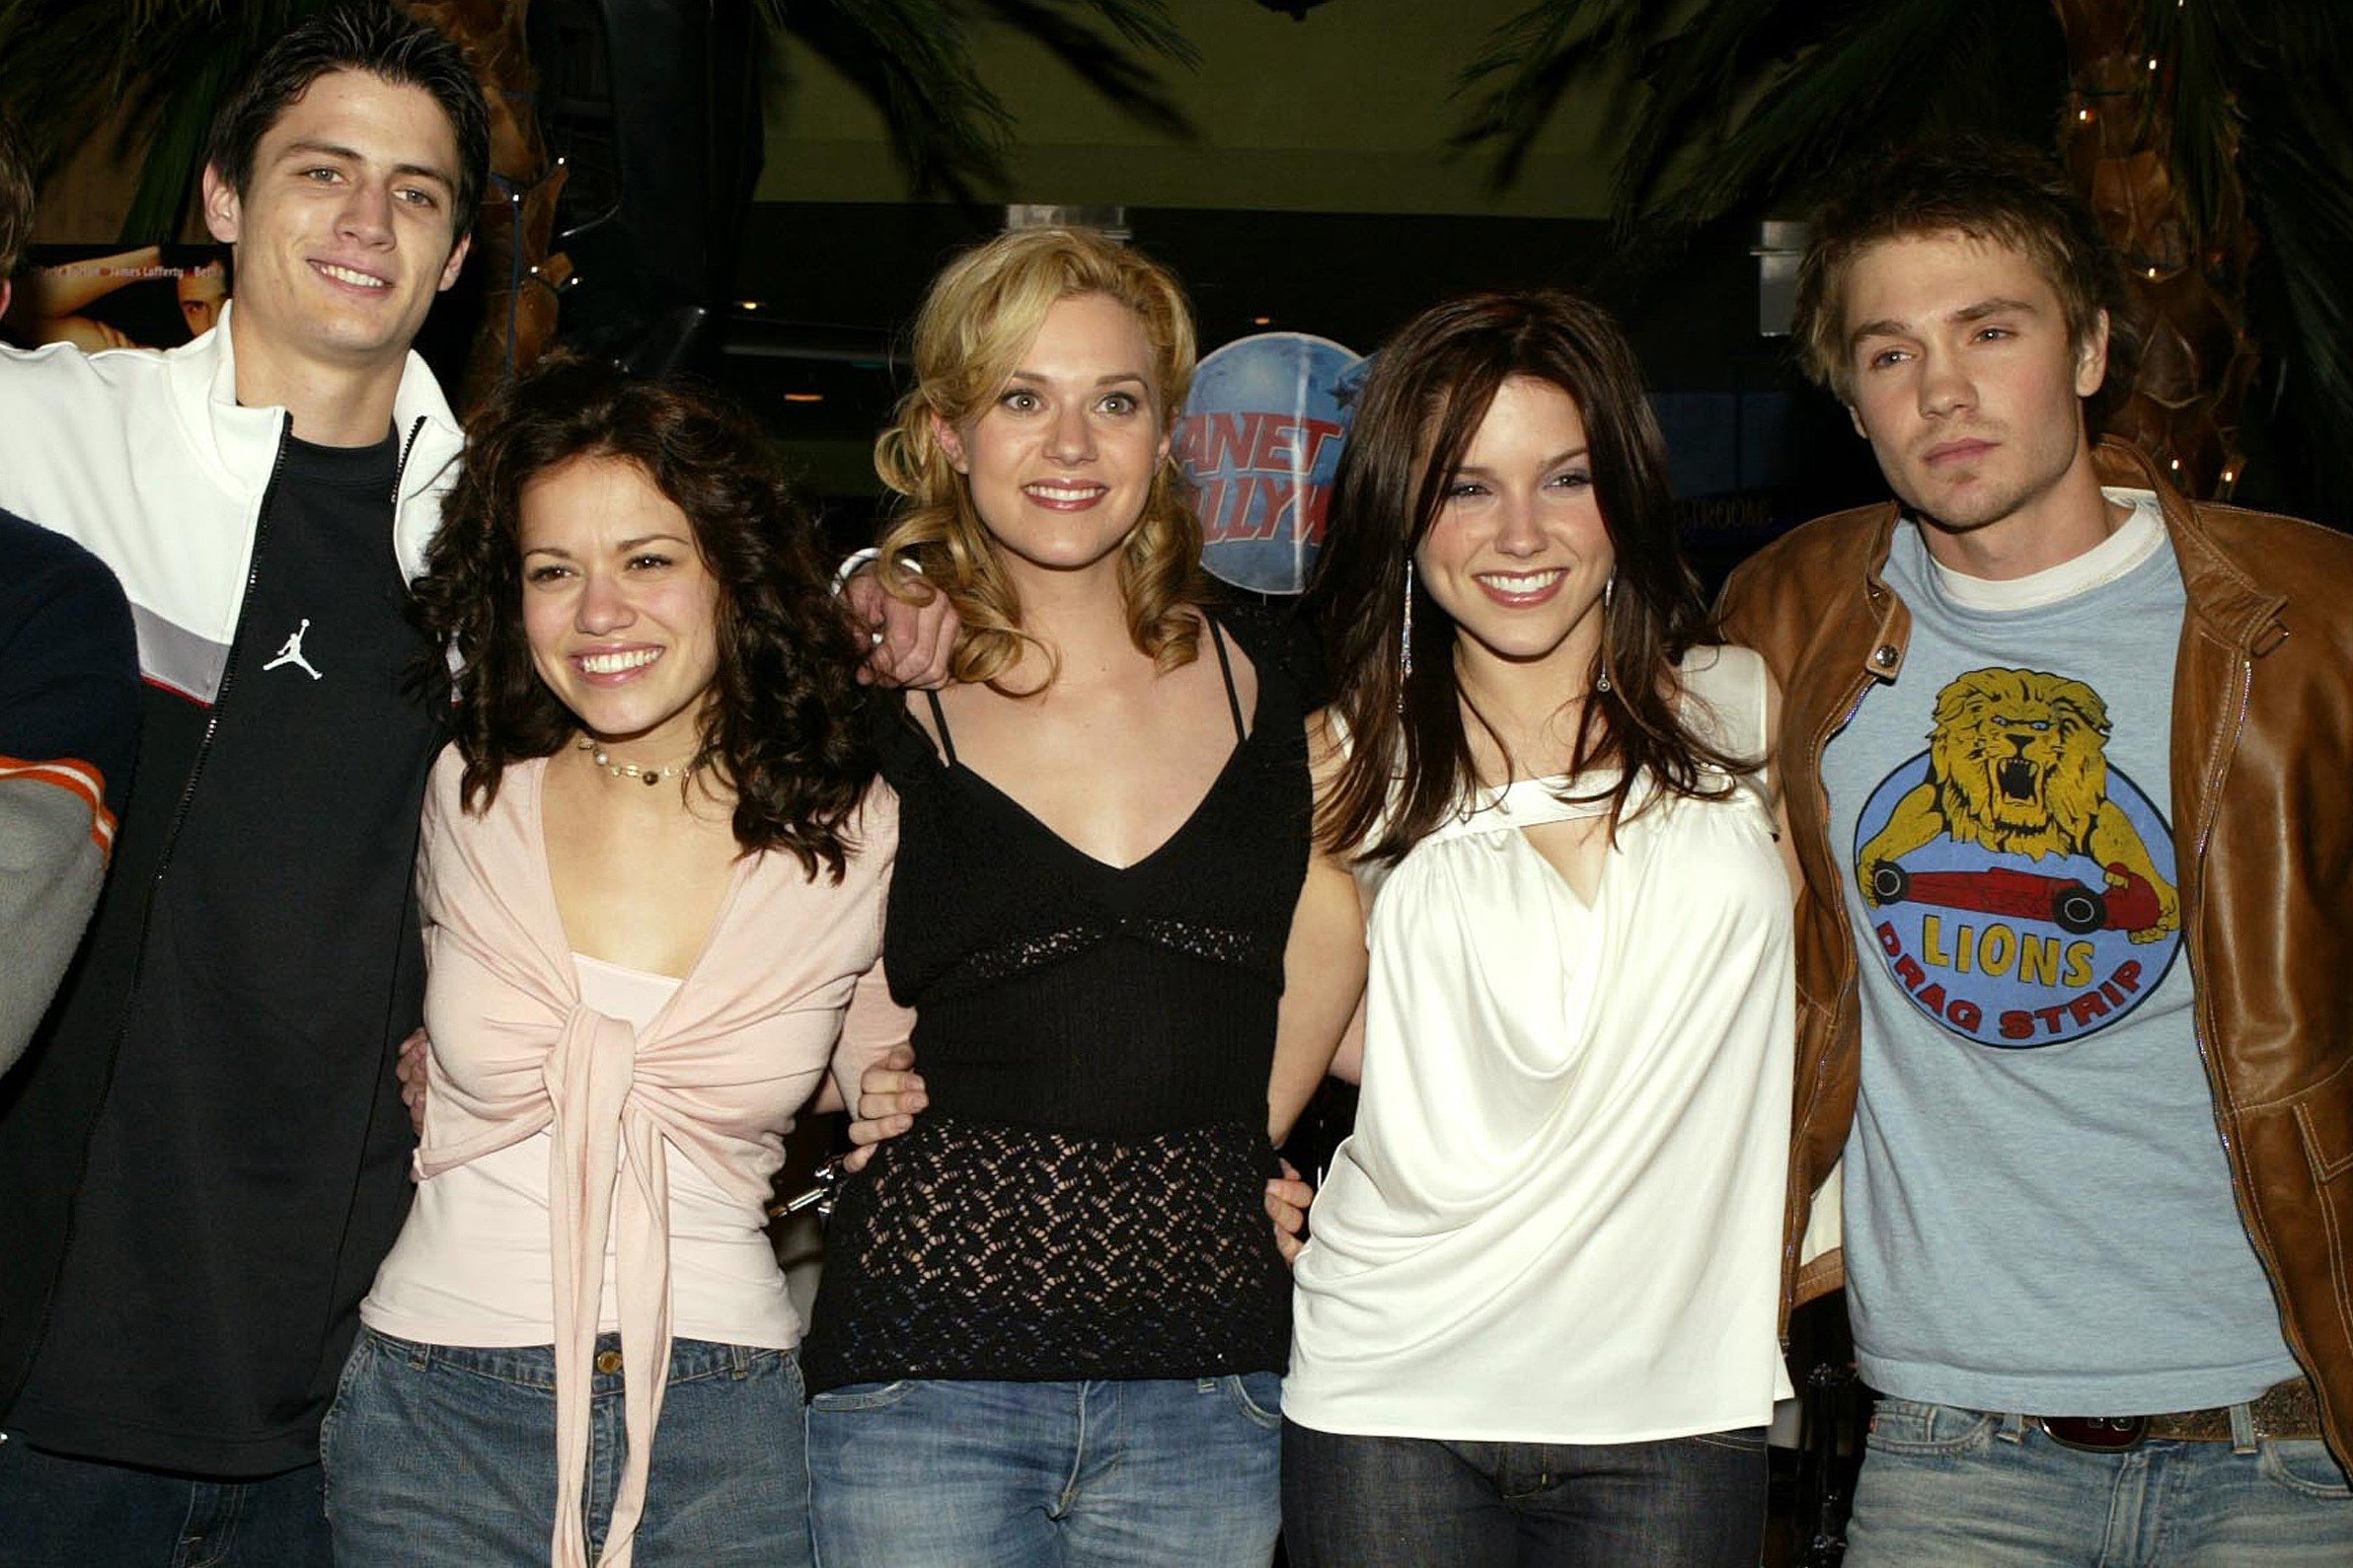 ‘One Tree Hill’: What Do Fans Think About the School Shooting Episode?